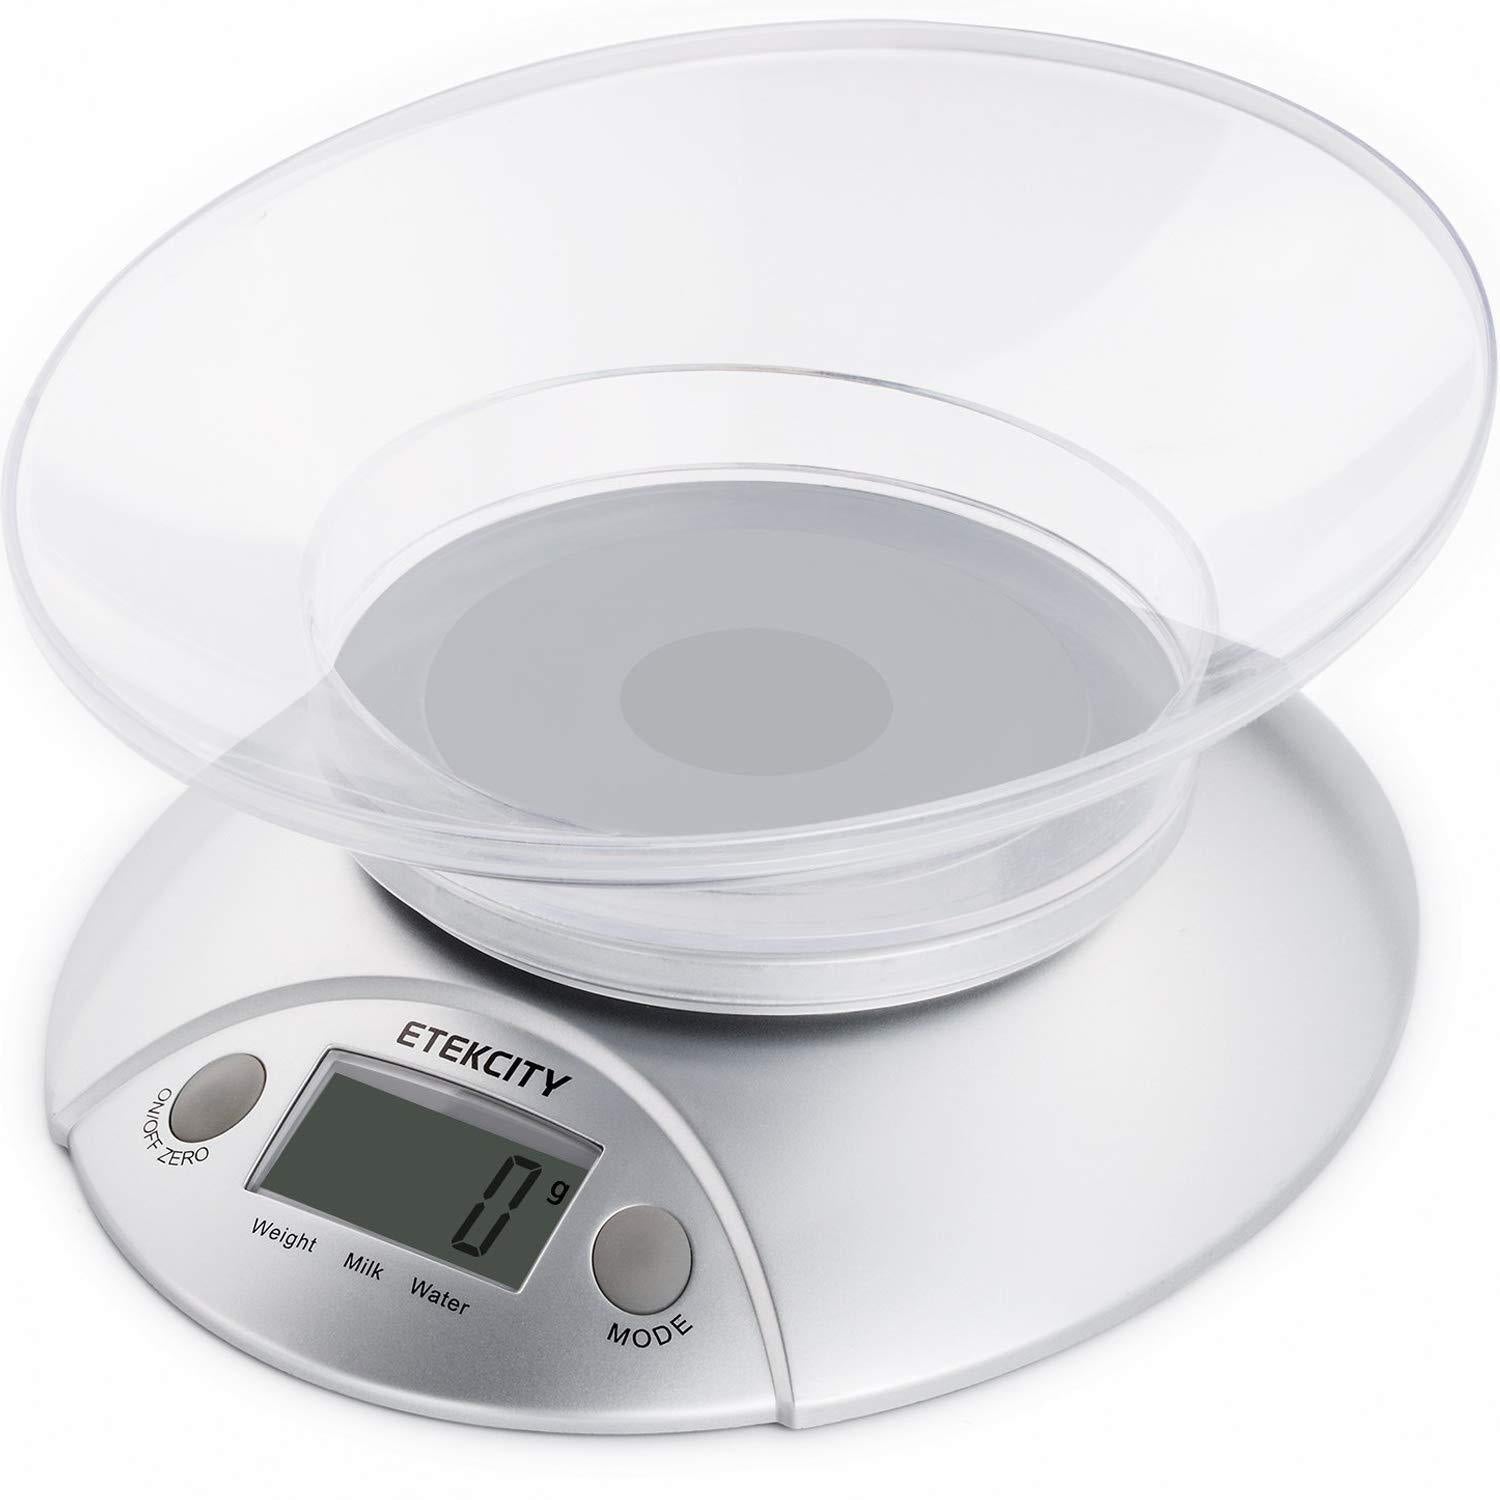 Etekcity Digital Kitchen Food Scale and Multifunction Weight Scale with Removable Bowl, 11 lb 5kg